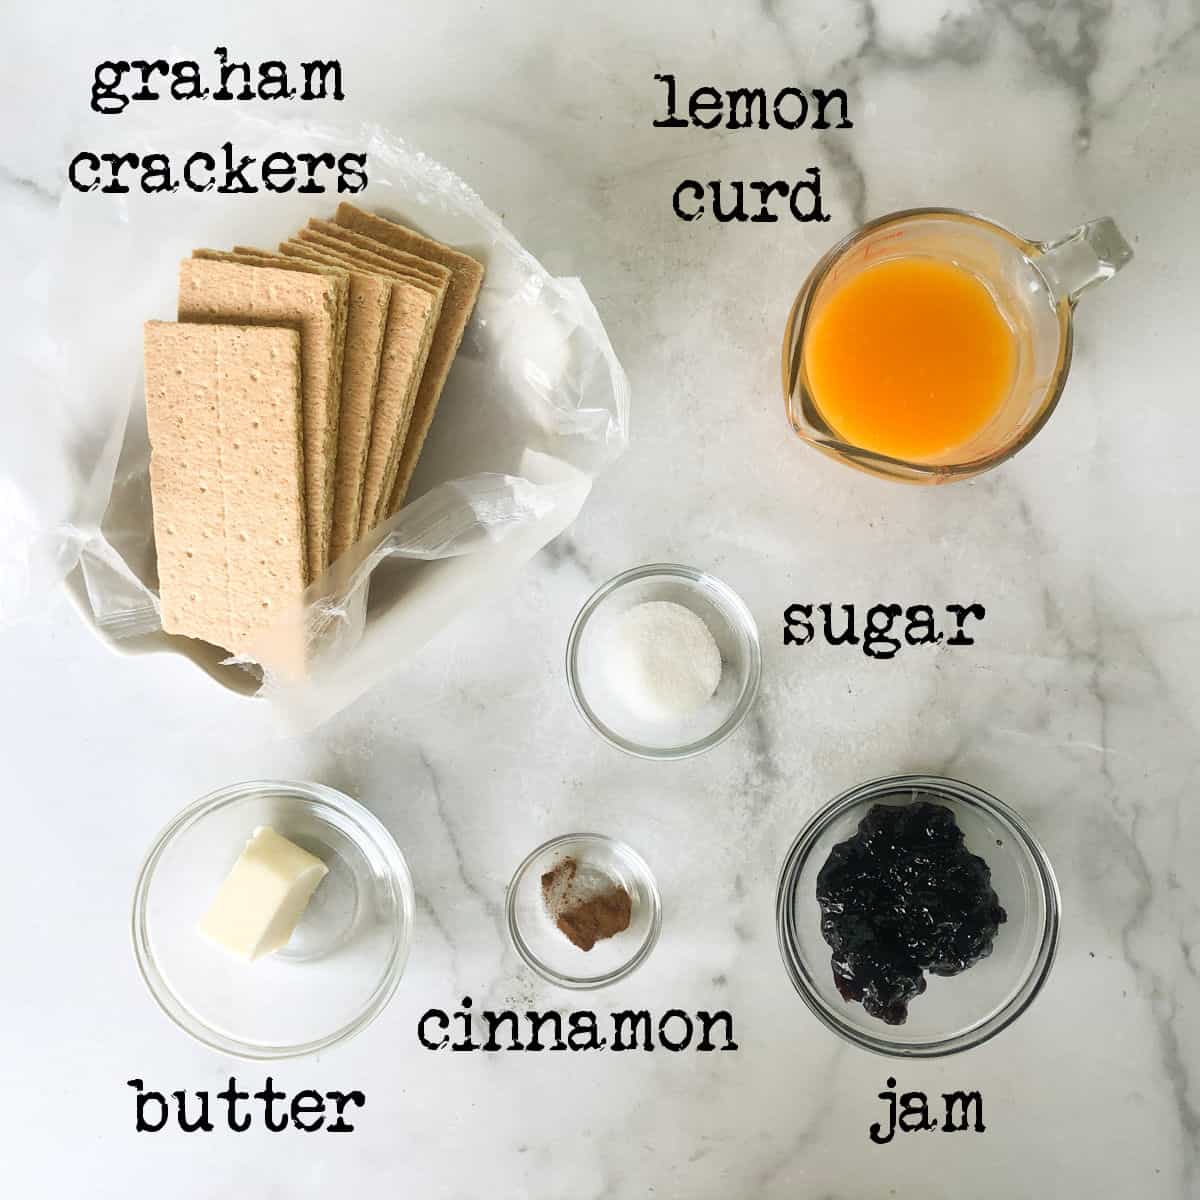 graham cracker sheets, lemon curd, butter, cinnamon and blackberry jamin clear bowls on marble surface.